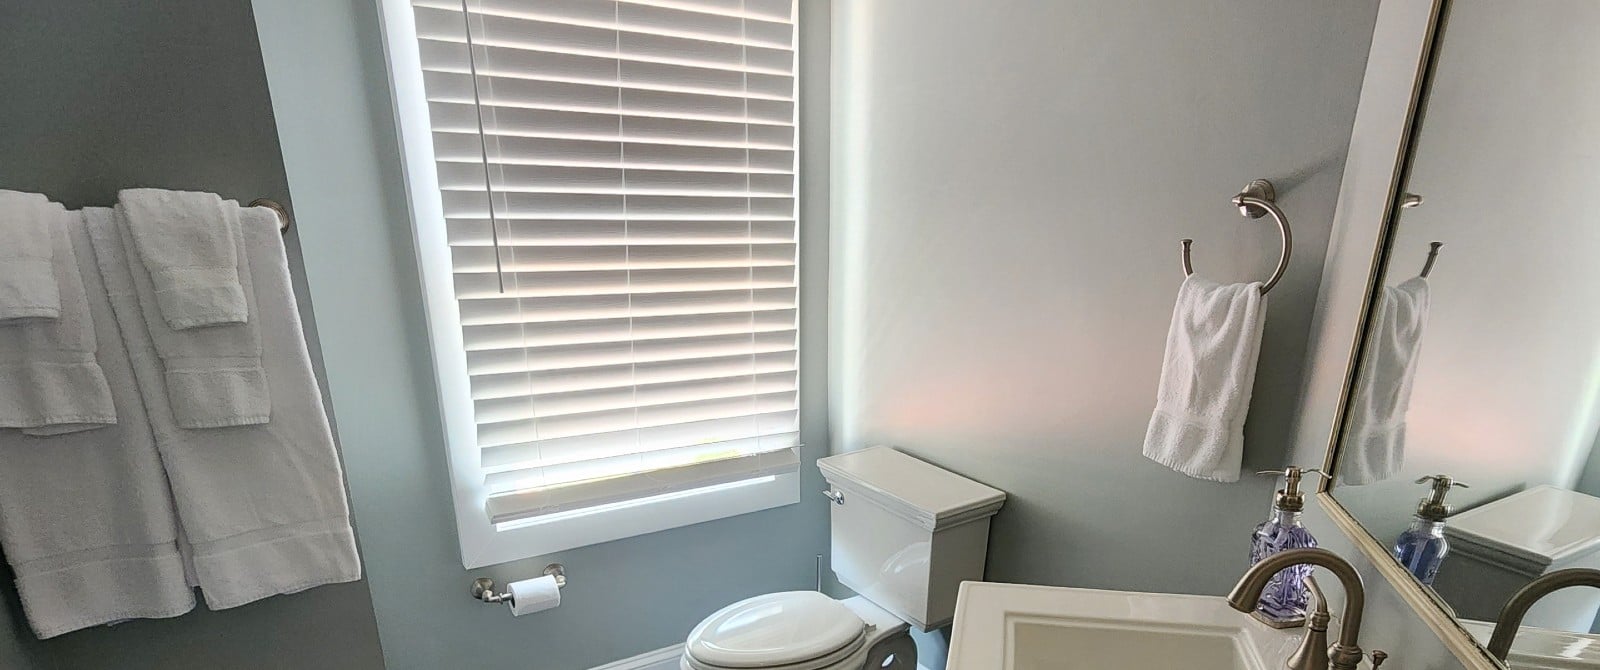 Bathroom with pedestal sink, framed mirror, toilet and window with blinds by hanging towels